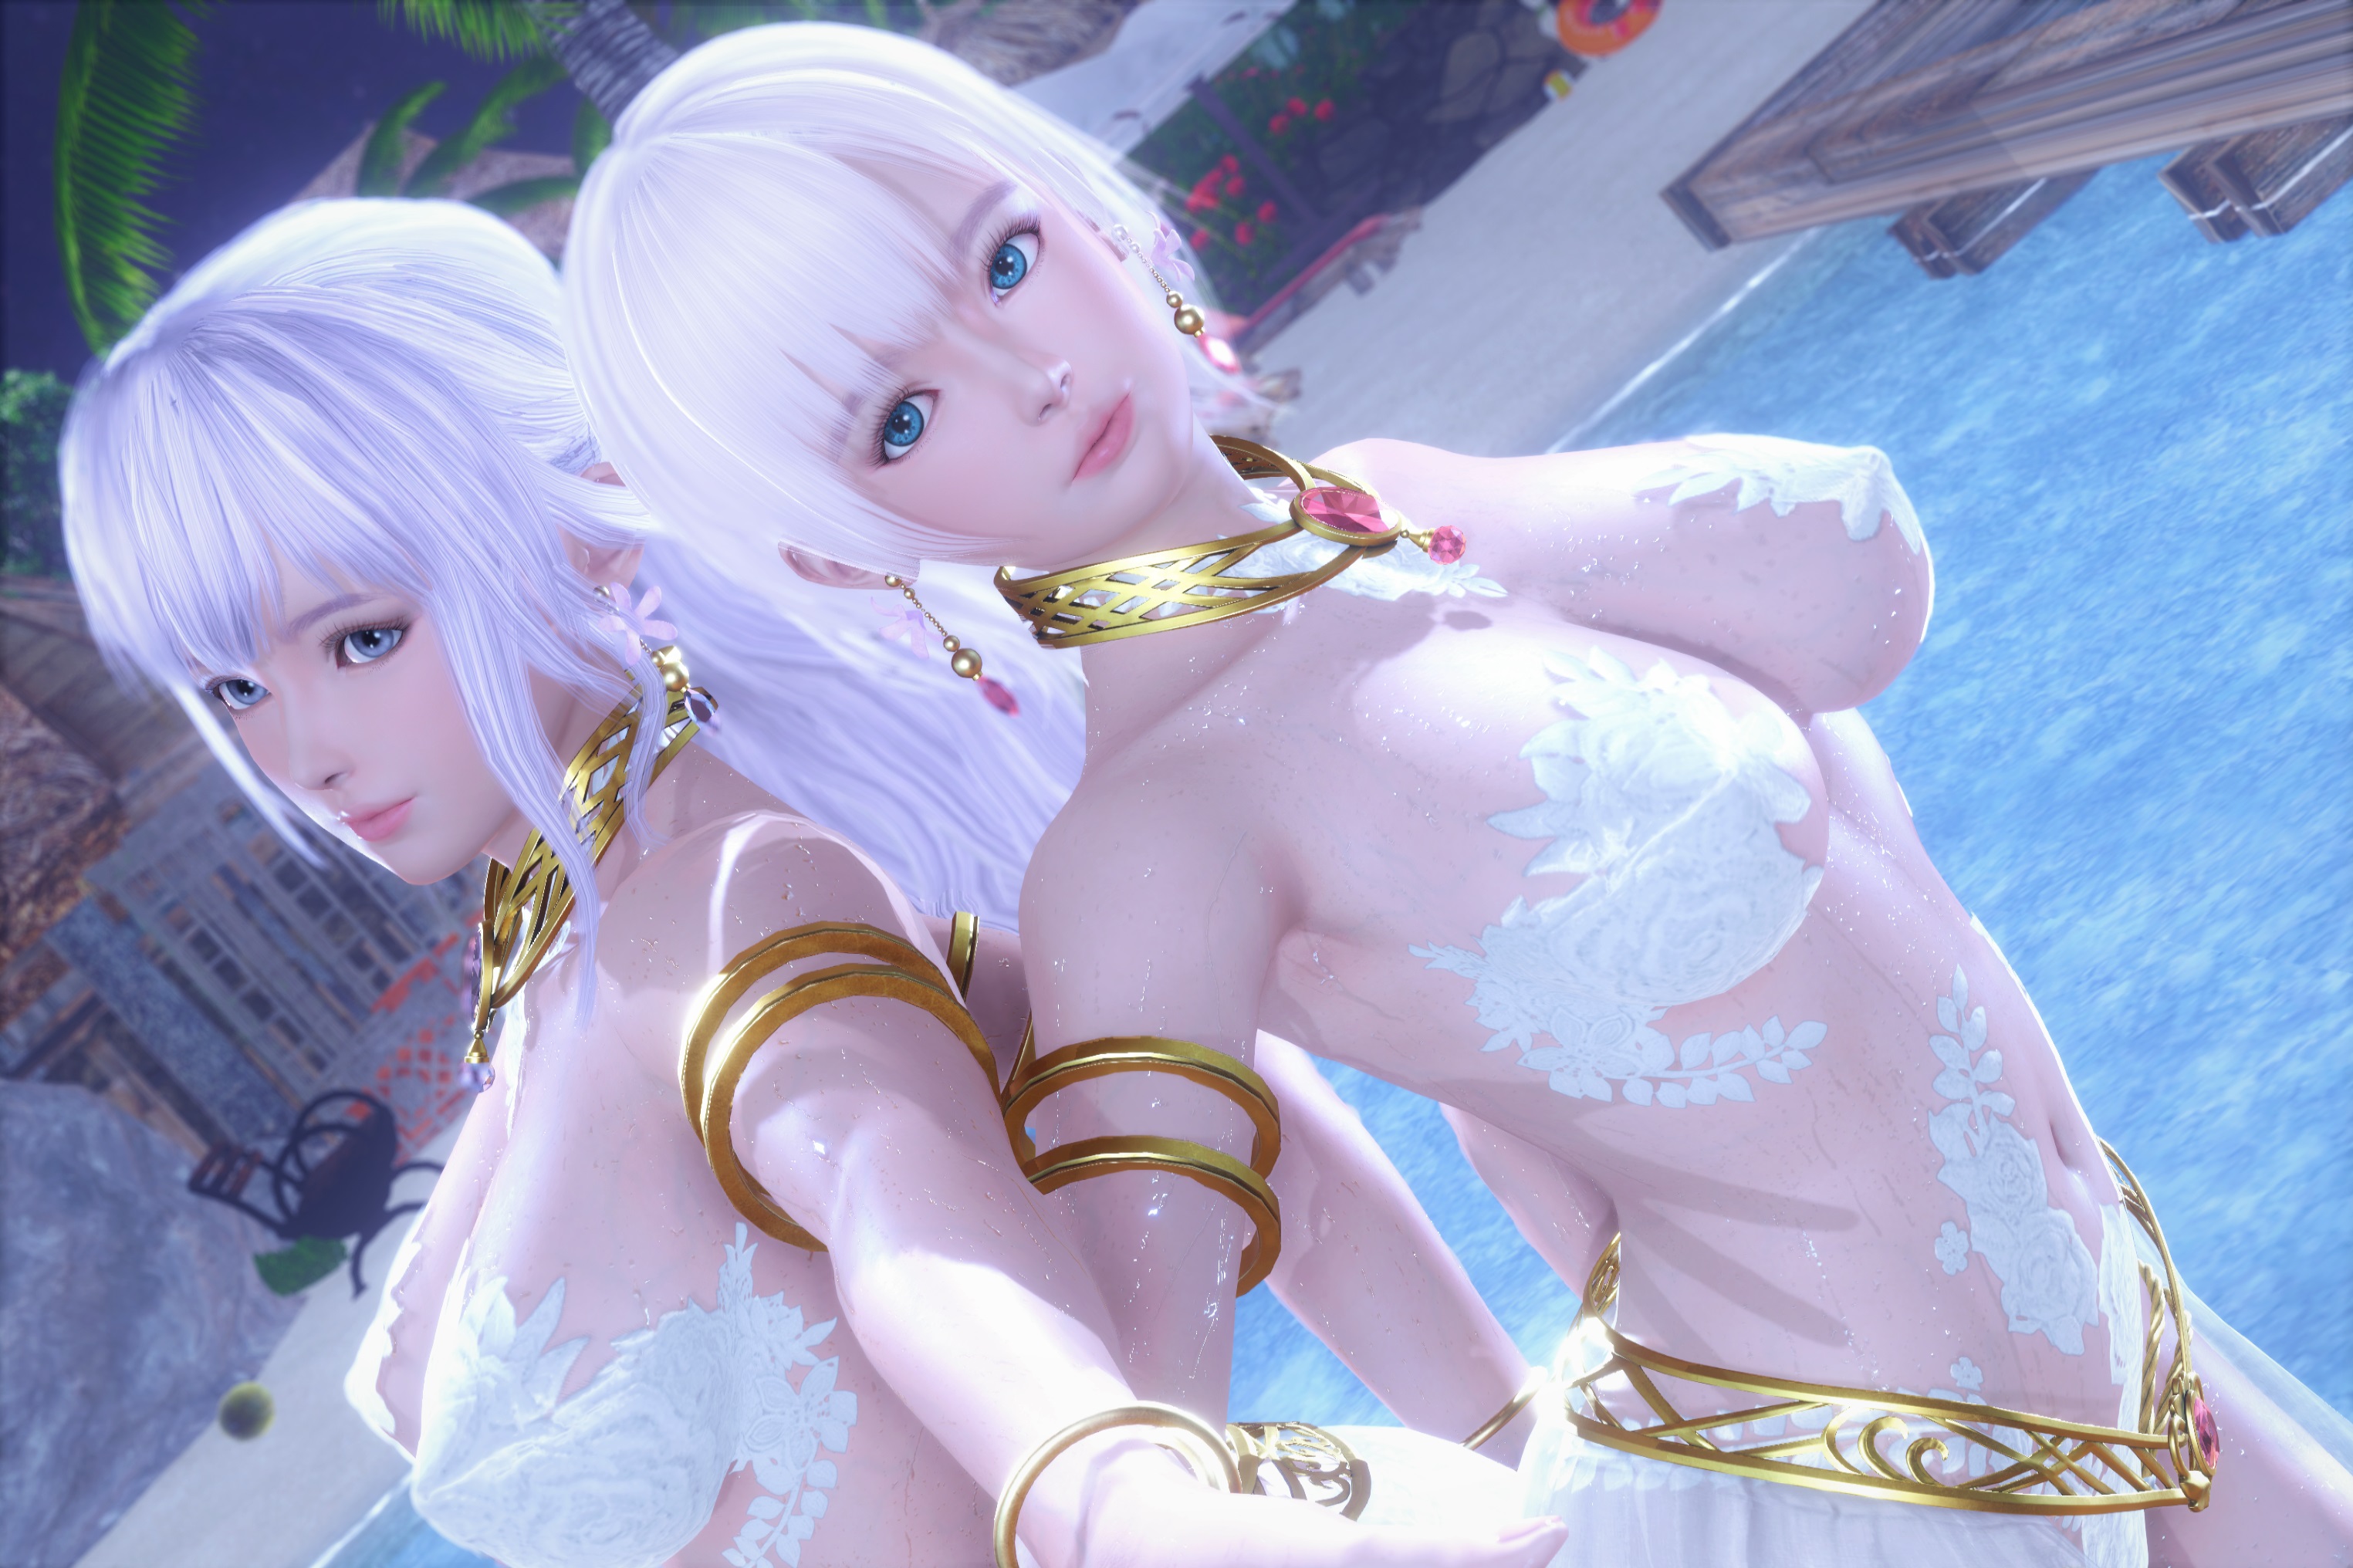 General 3049x2032 Dead or Alive video game characters video game girls white hair bangs blue eyes necklace jewelry armlet wet body beach CGI artwork digital art fan art belly Luna (Dead or Alive) boobs big boobs pink lipstick video games video game warriors two women Fiona (DOA)